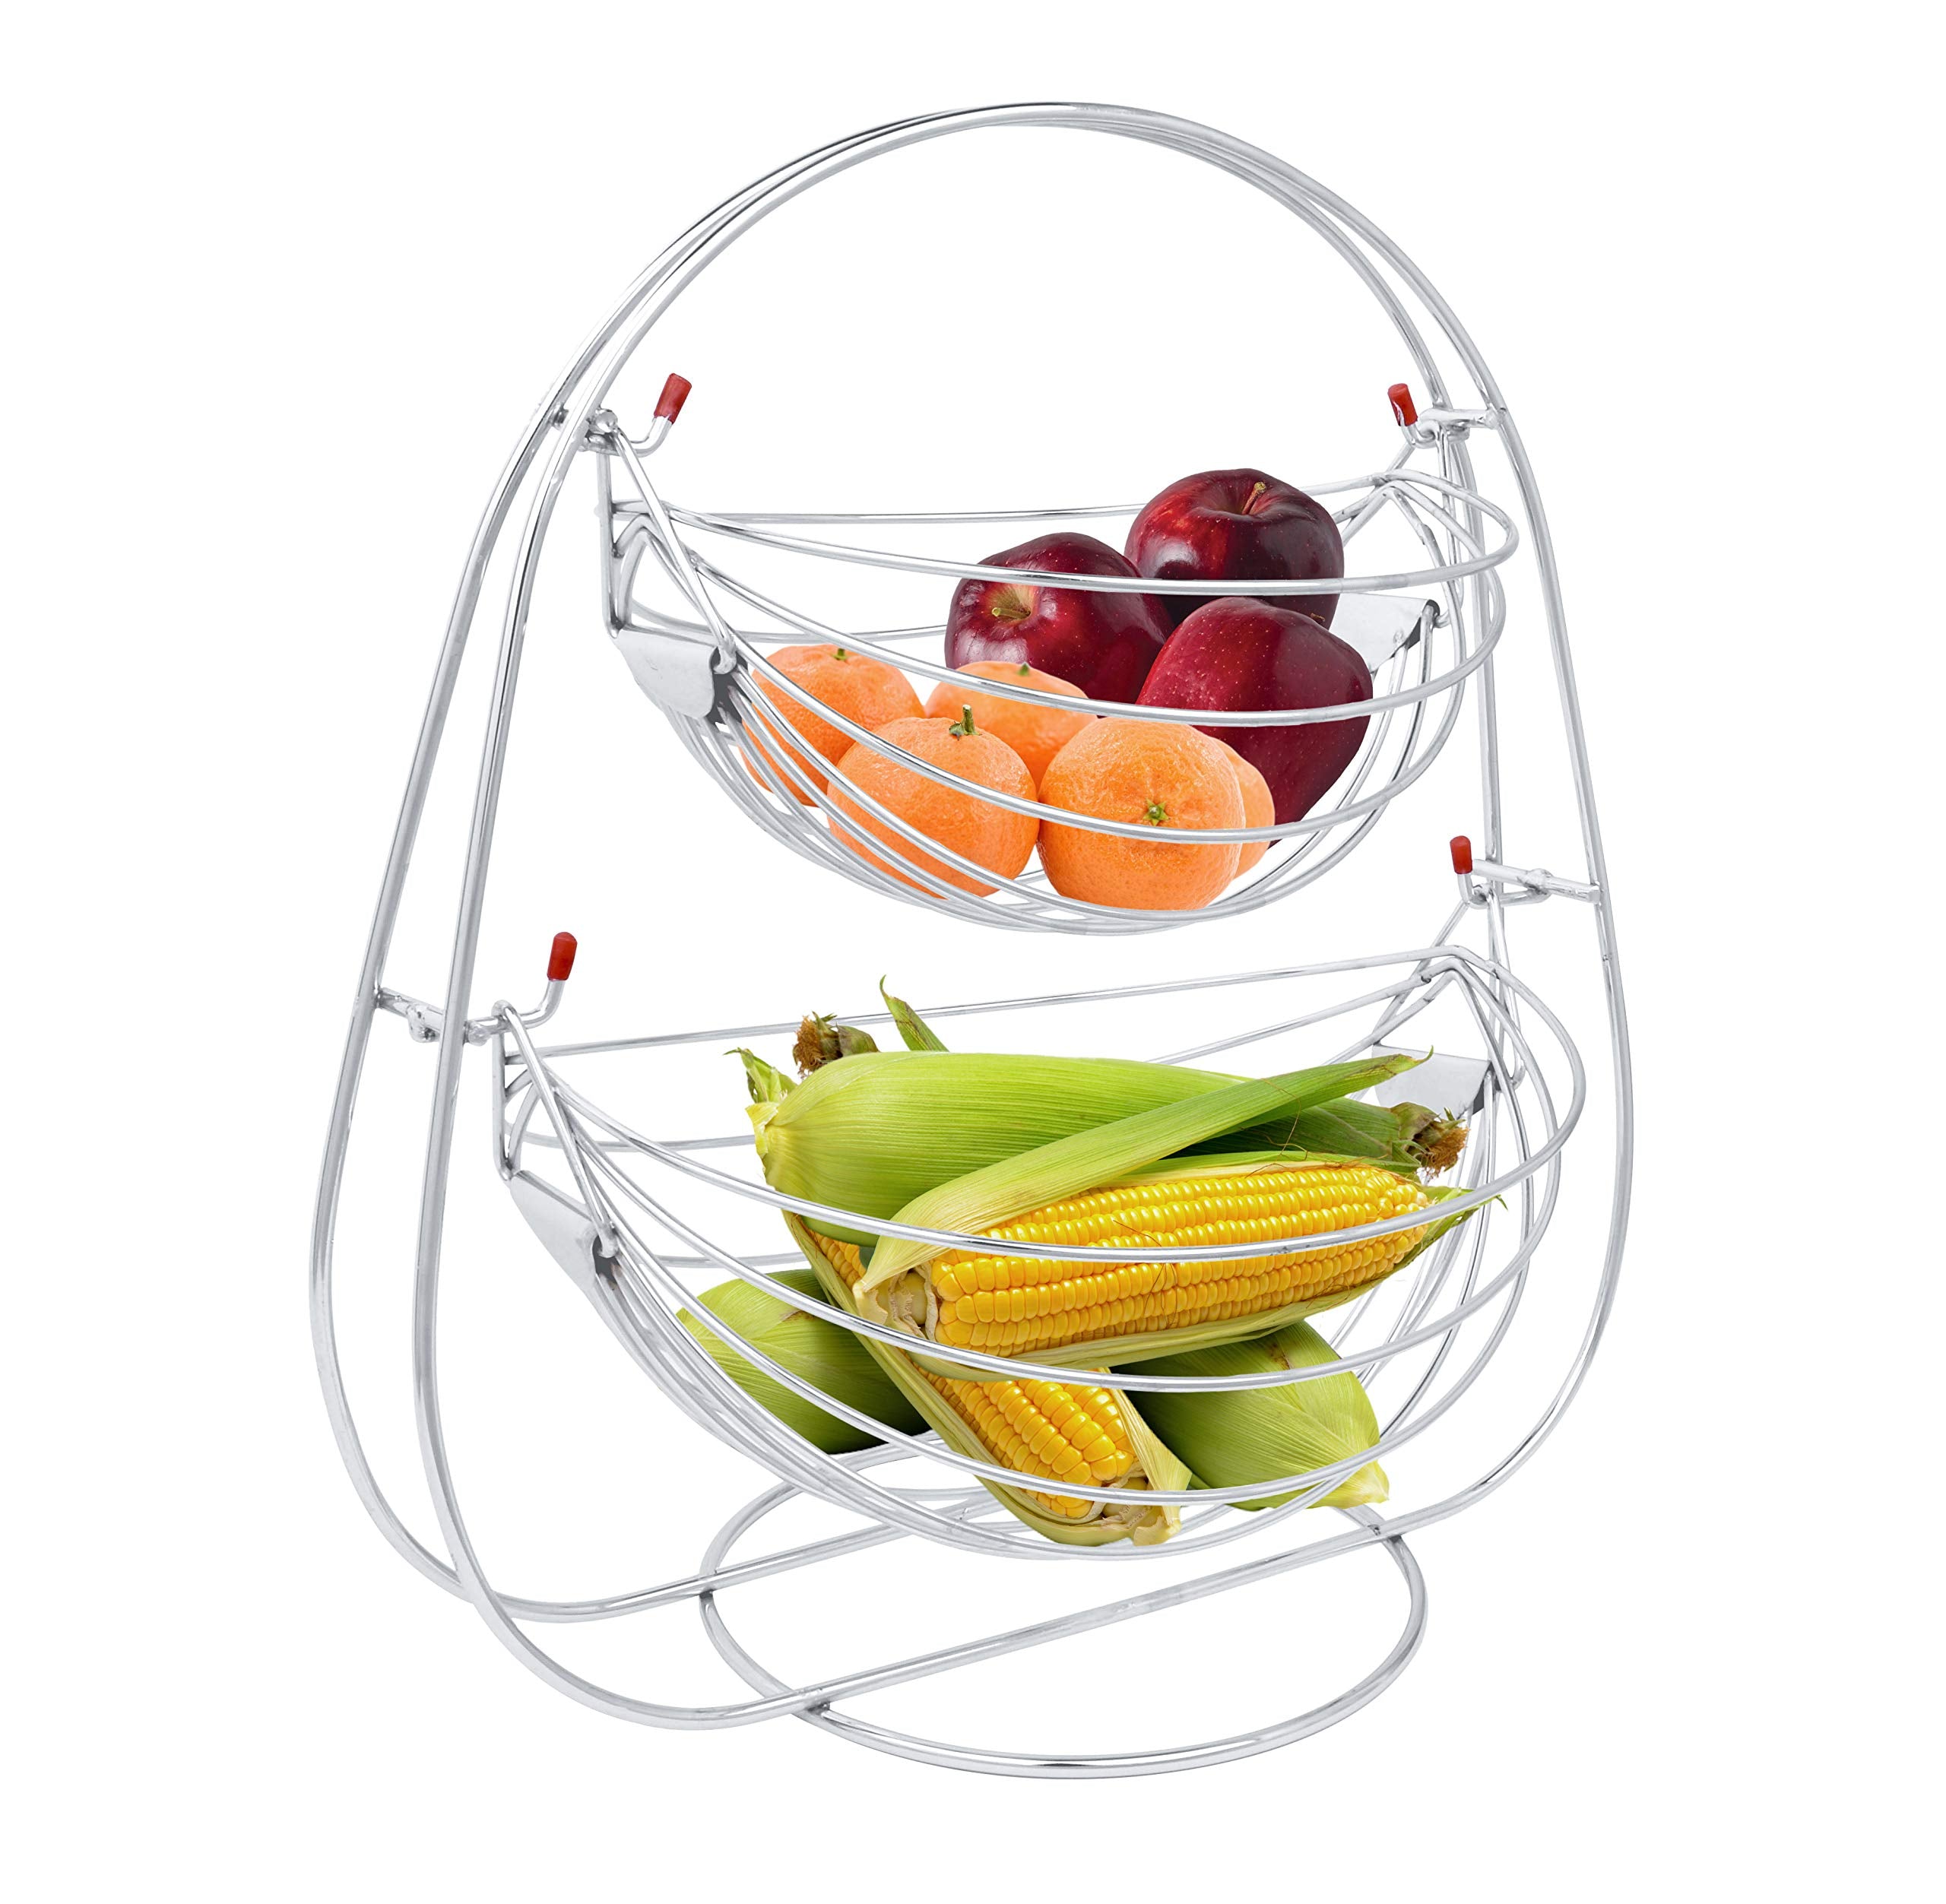 Plantex Stainless Steel Double Step Swing Fruit and Vegetable Basket (Silver)